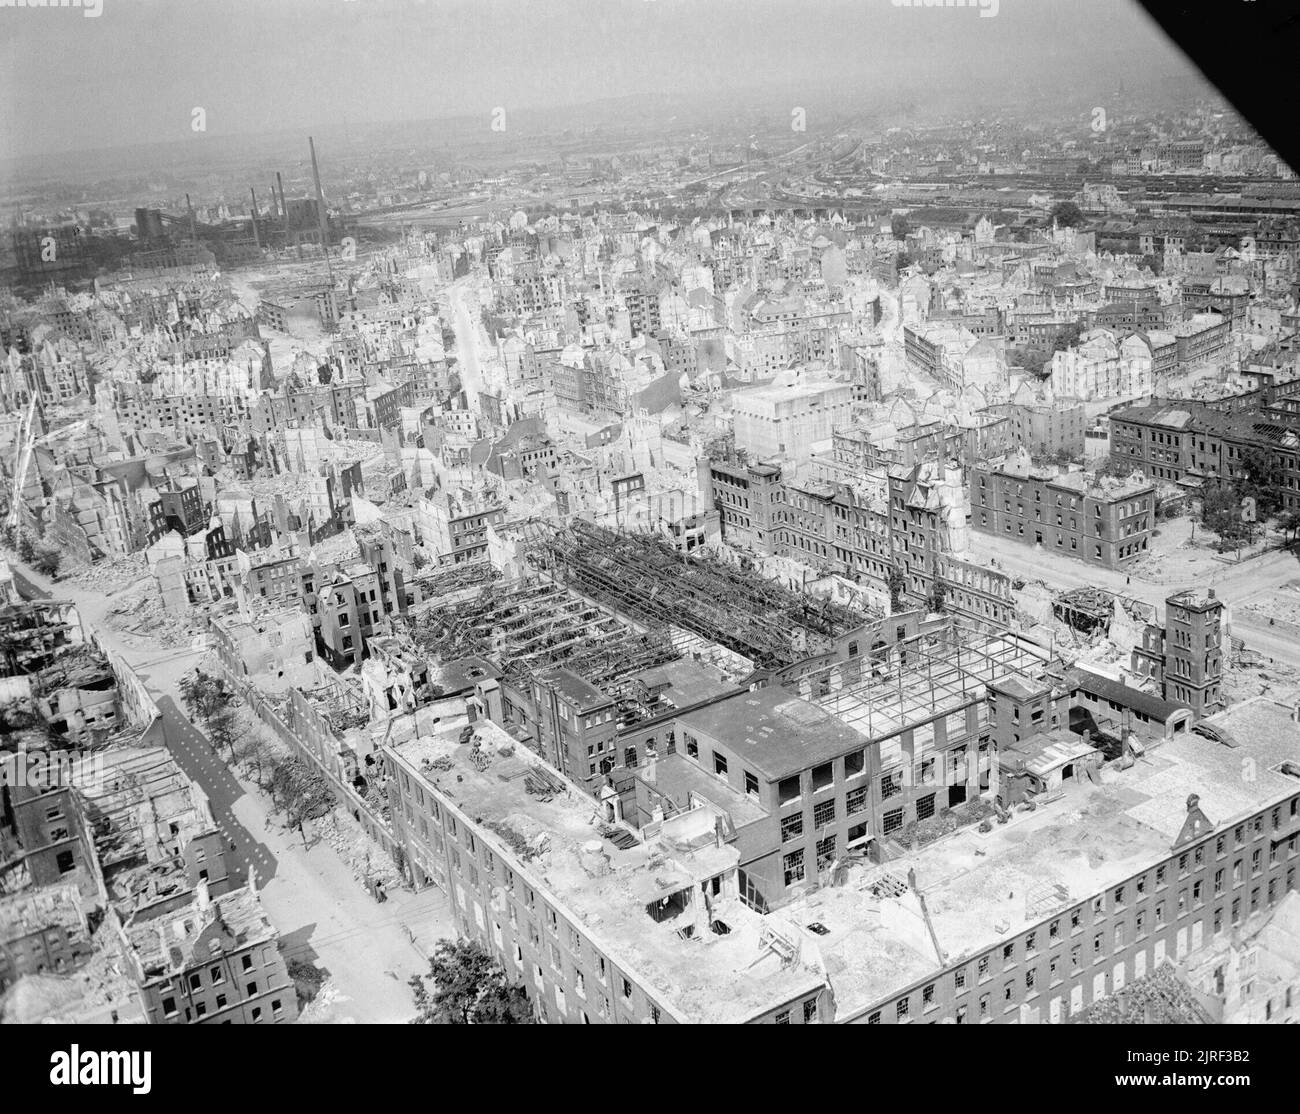 A part of Nuremberg, devastated by Allied bombing, 28 May 1945. Oblique aerial view of heavily-damaged industrial and residential buildings in Nuremberg. Visible at the centre of the photo is a multi-story above-ground air raid bunker. At the bottom of the photo, below the bunker, is the Siemens plant. Top left is the gas works in Nürnberg-Sandreuth, top right is the main station (Hauptbahnhof) Stock Photo